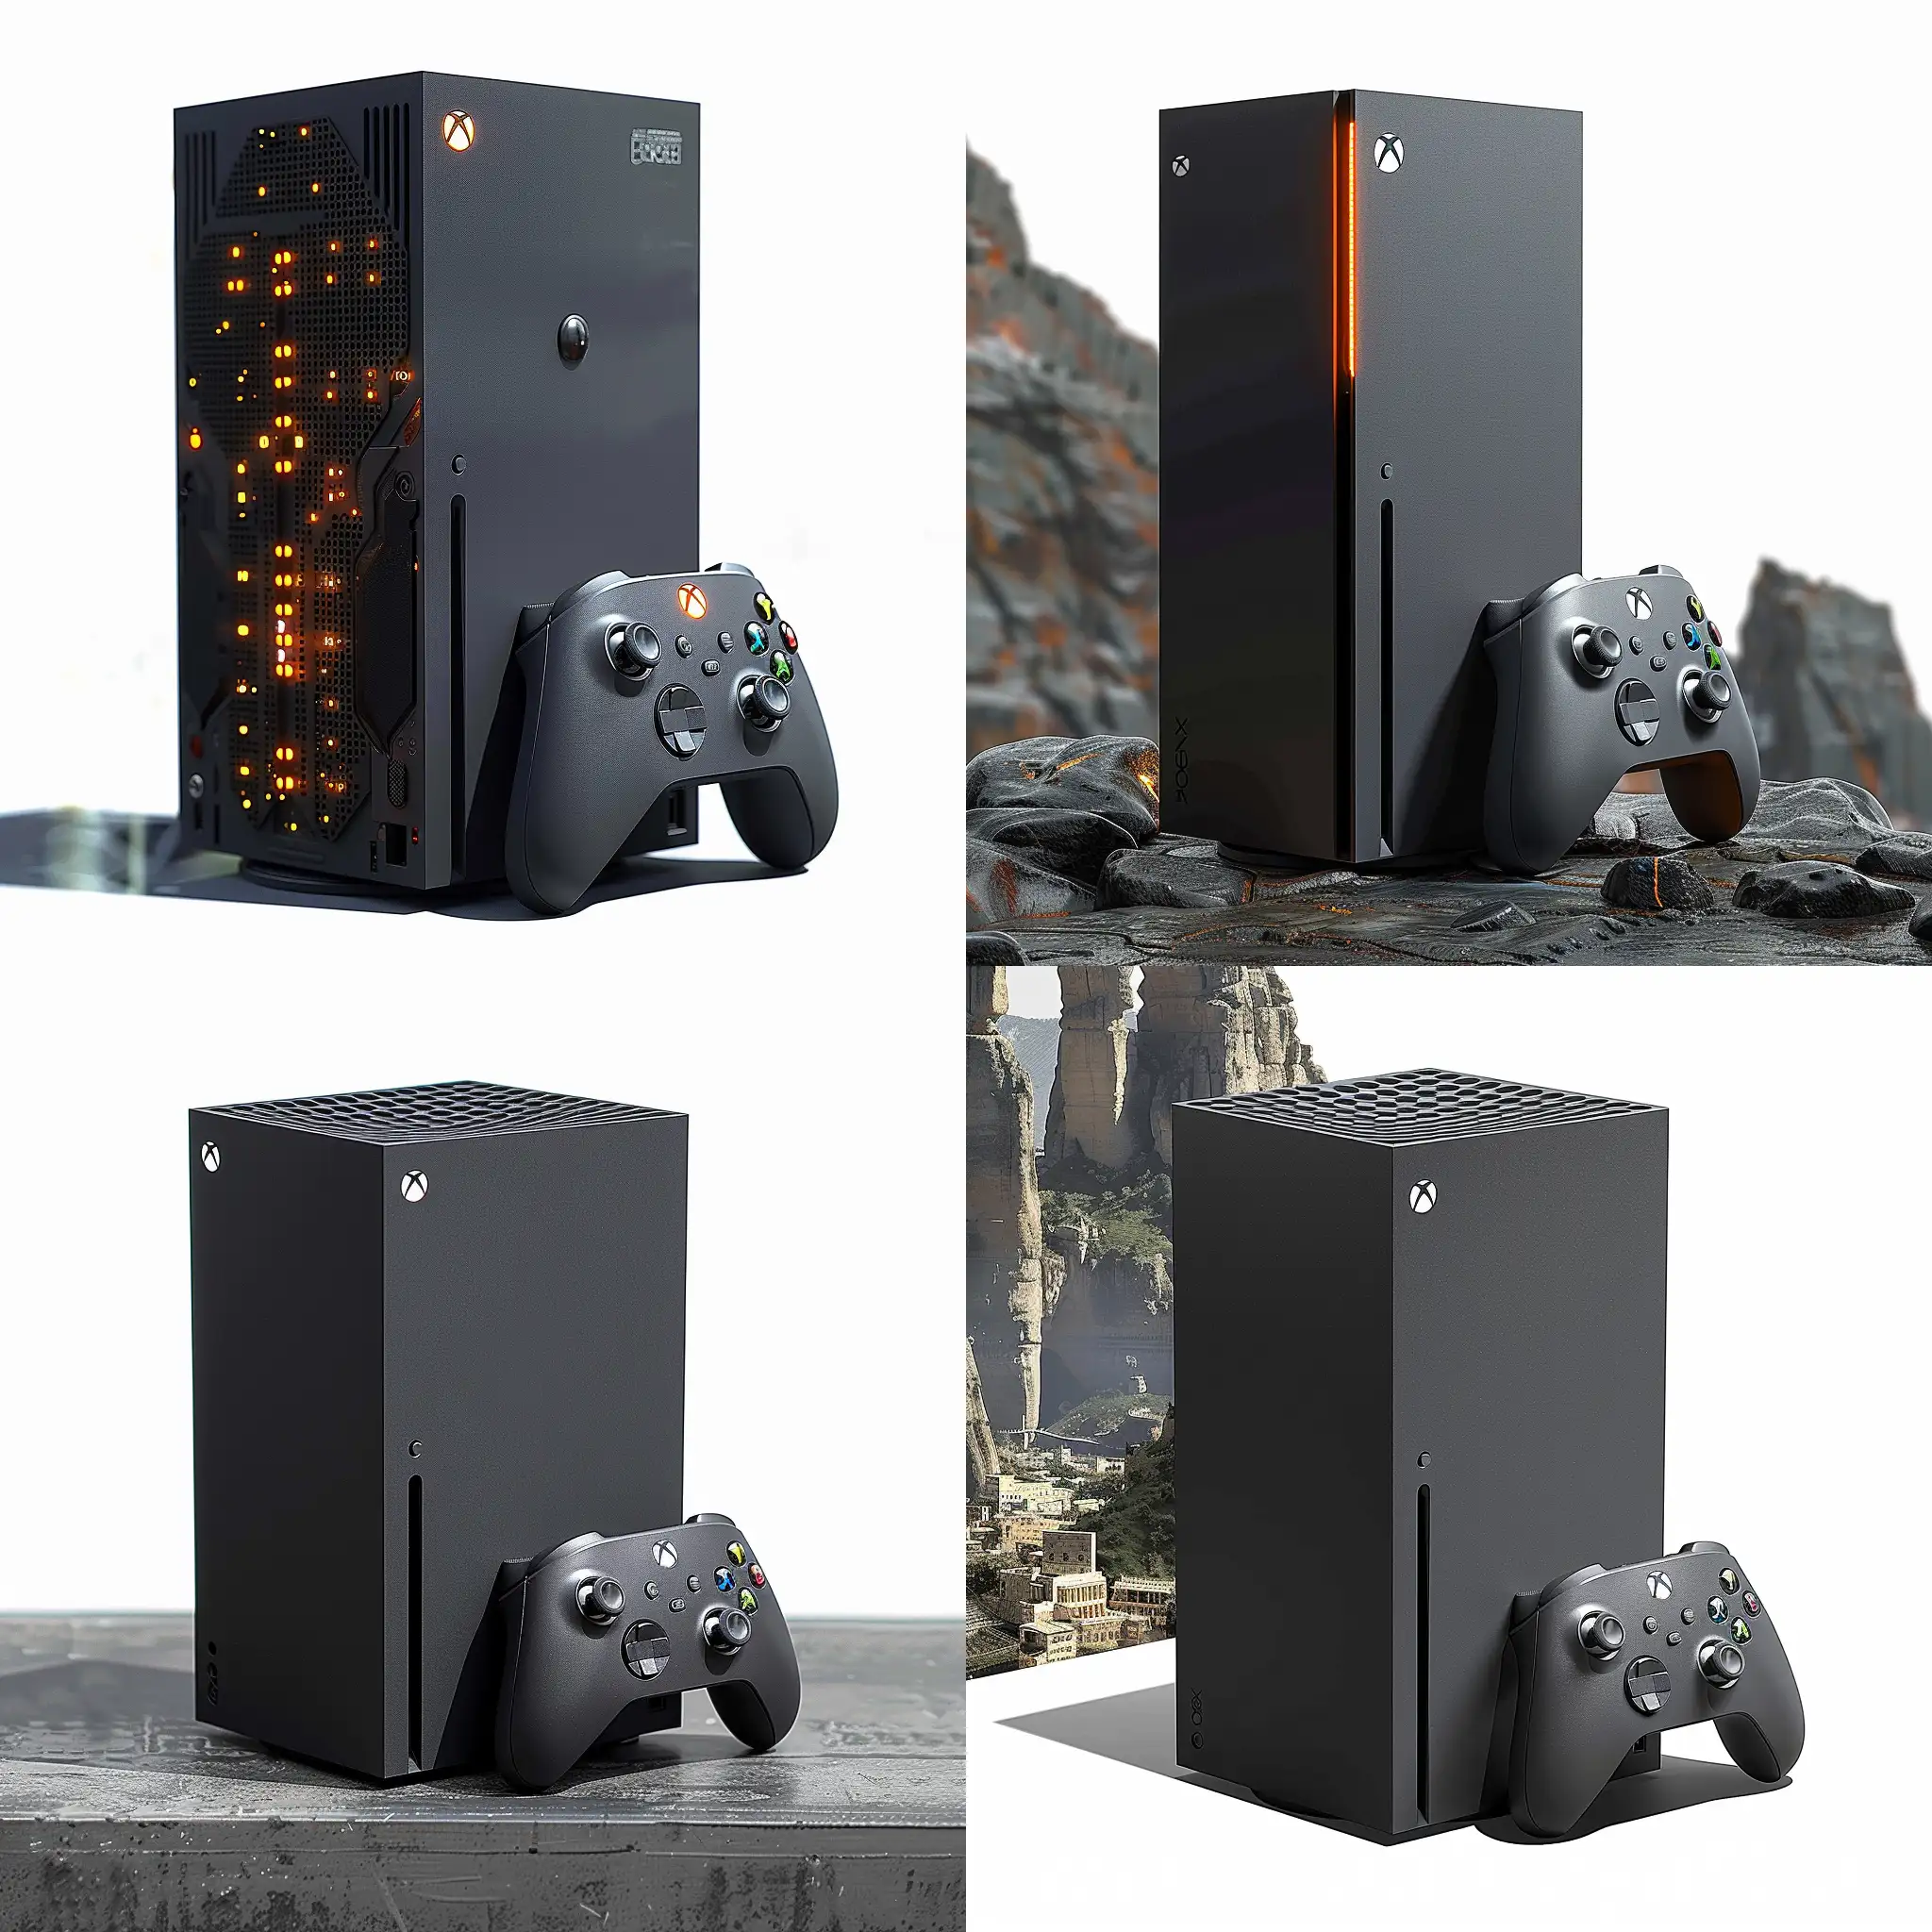 Futuristic-Xbox-Series-X-Gaming-Console-with-4K-Resolution-and-Ray-Tracing